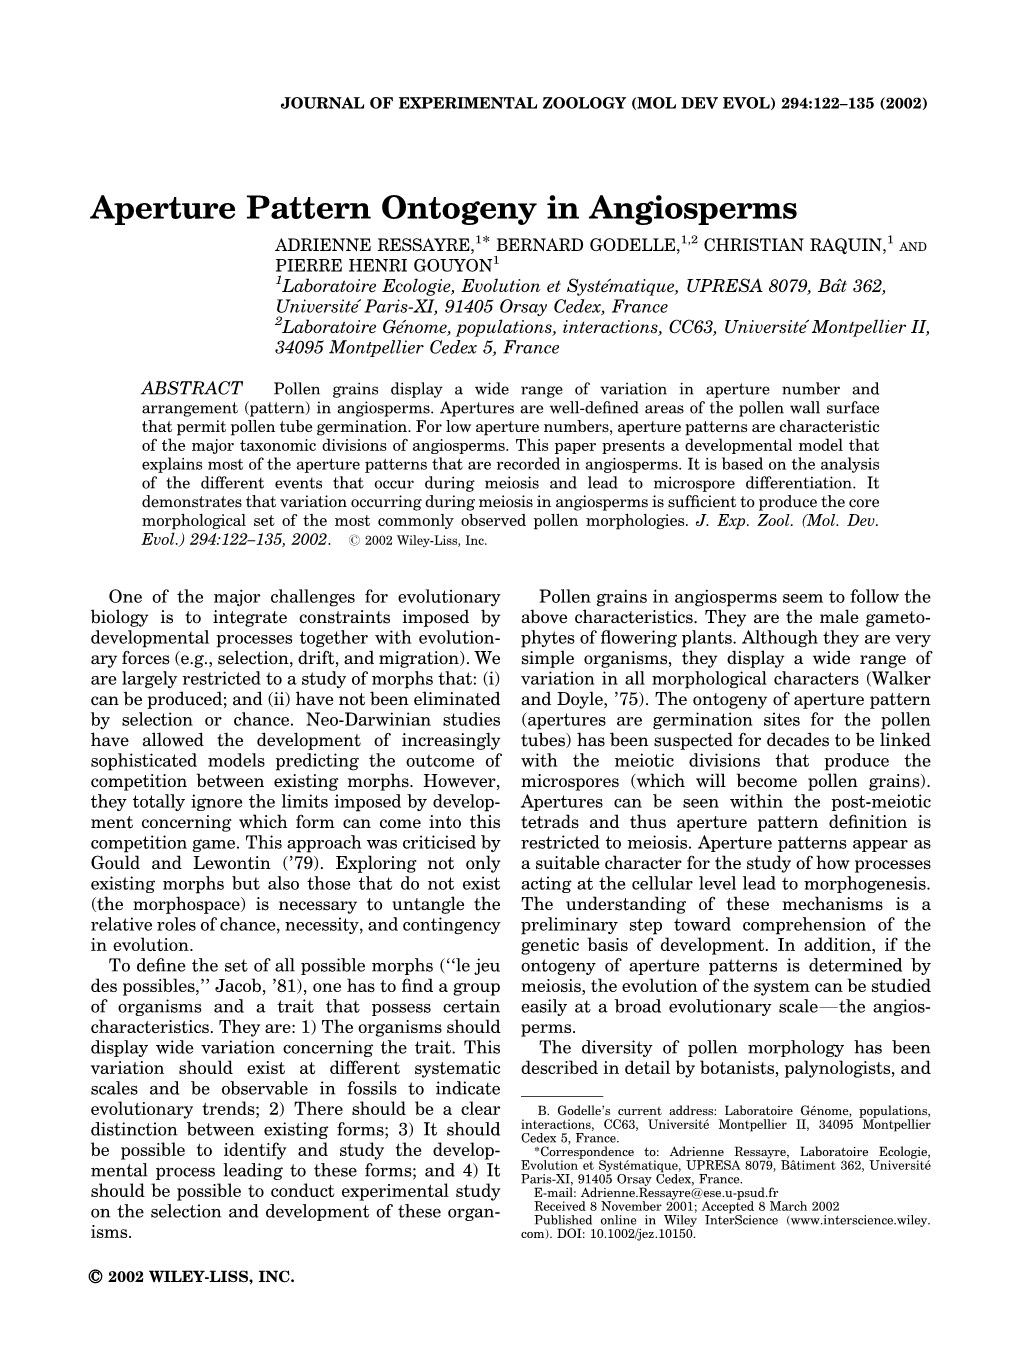 Aperture Pattern Ontogeny in Angiosperms